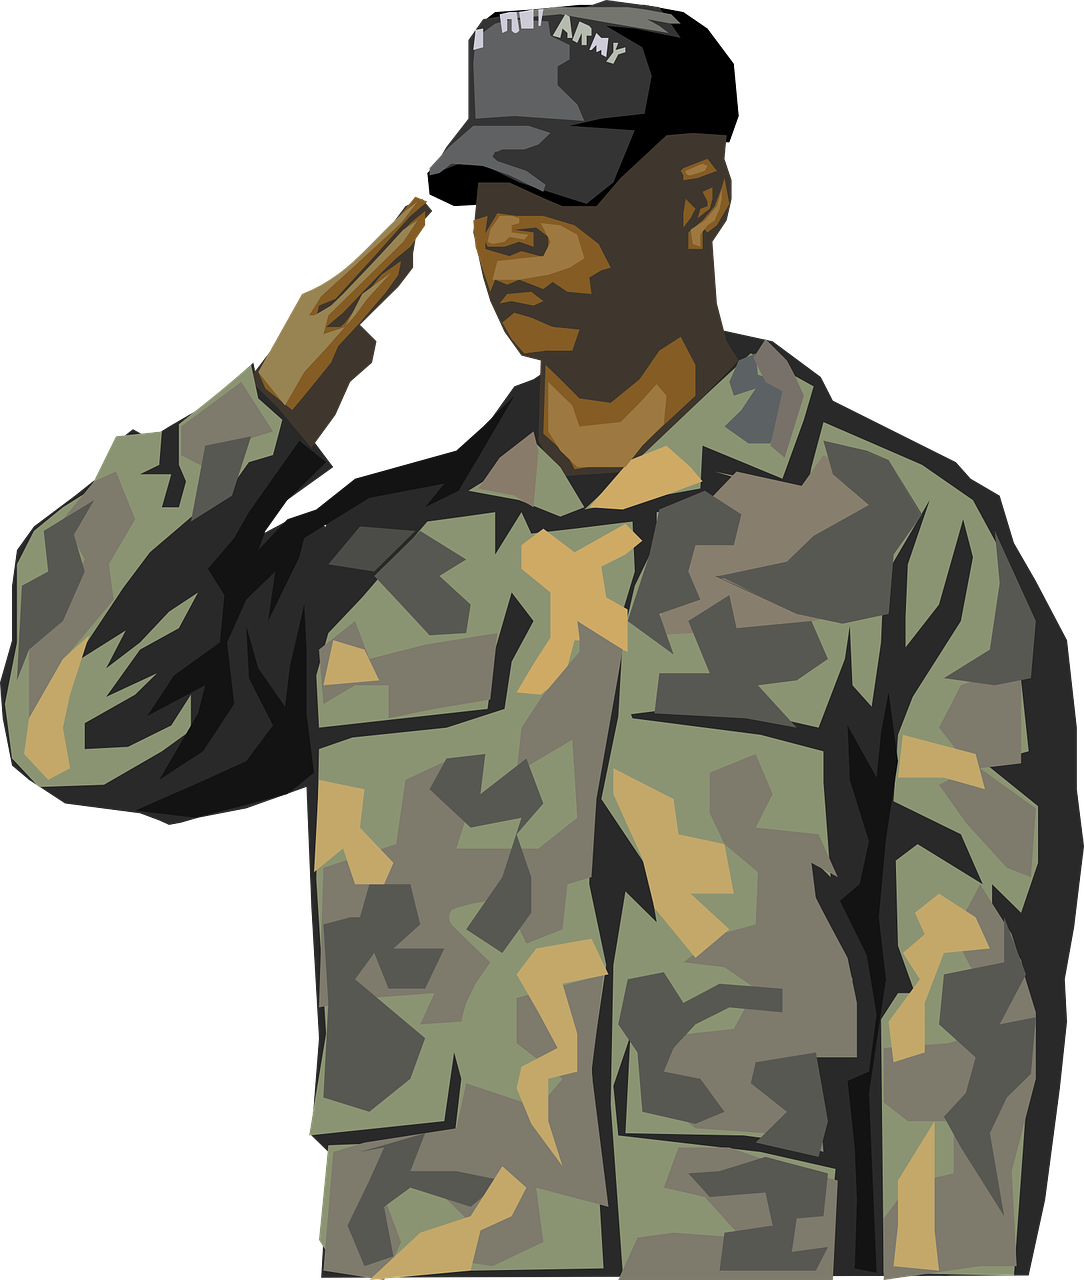 soldier-gfa2017227_1280.png